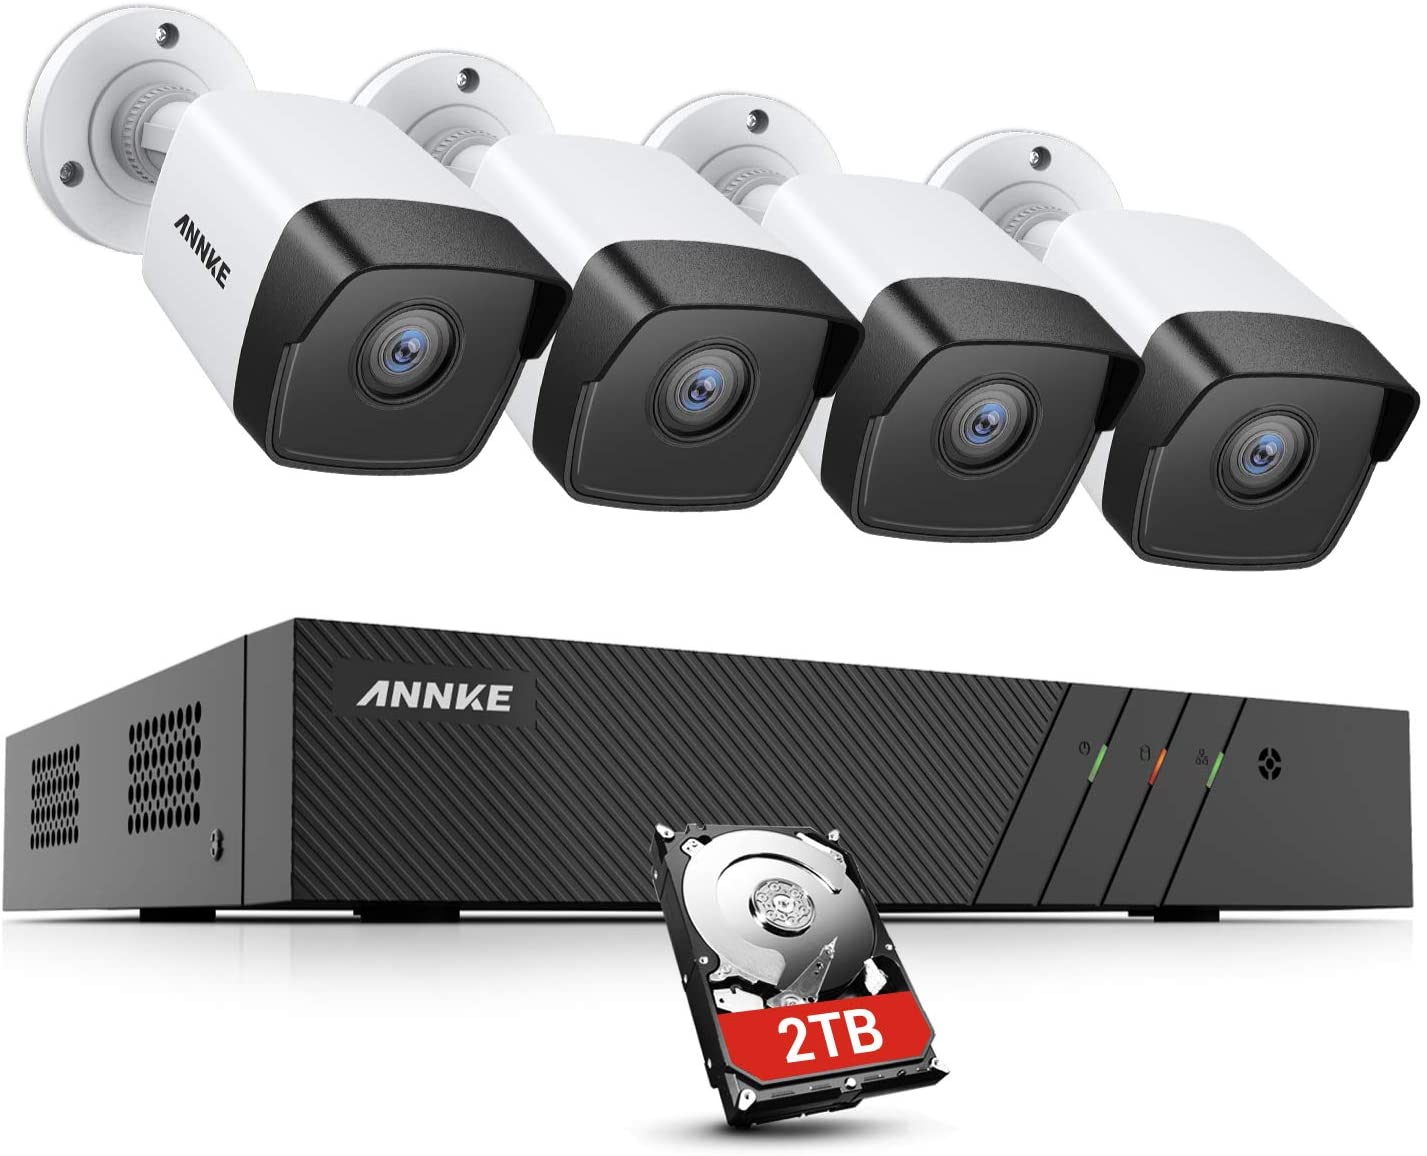 ANNKE 8CH 5MP PoE Home Security Camera System, 6MP H.265+ NVR w/2TB Surveillance HDD for $321.80 + FSSS